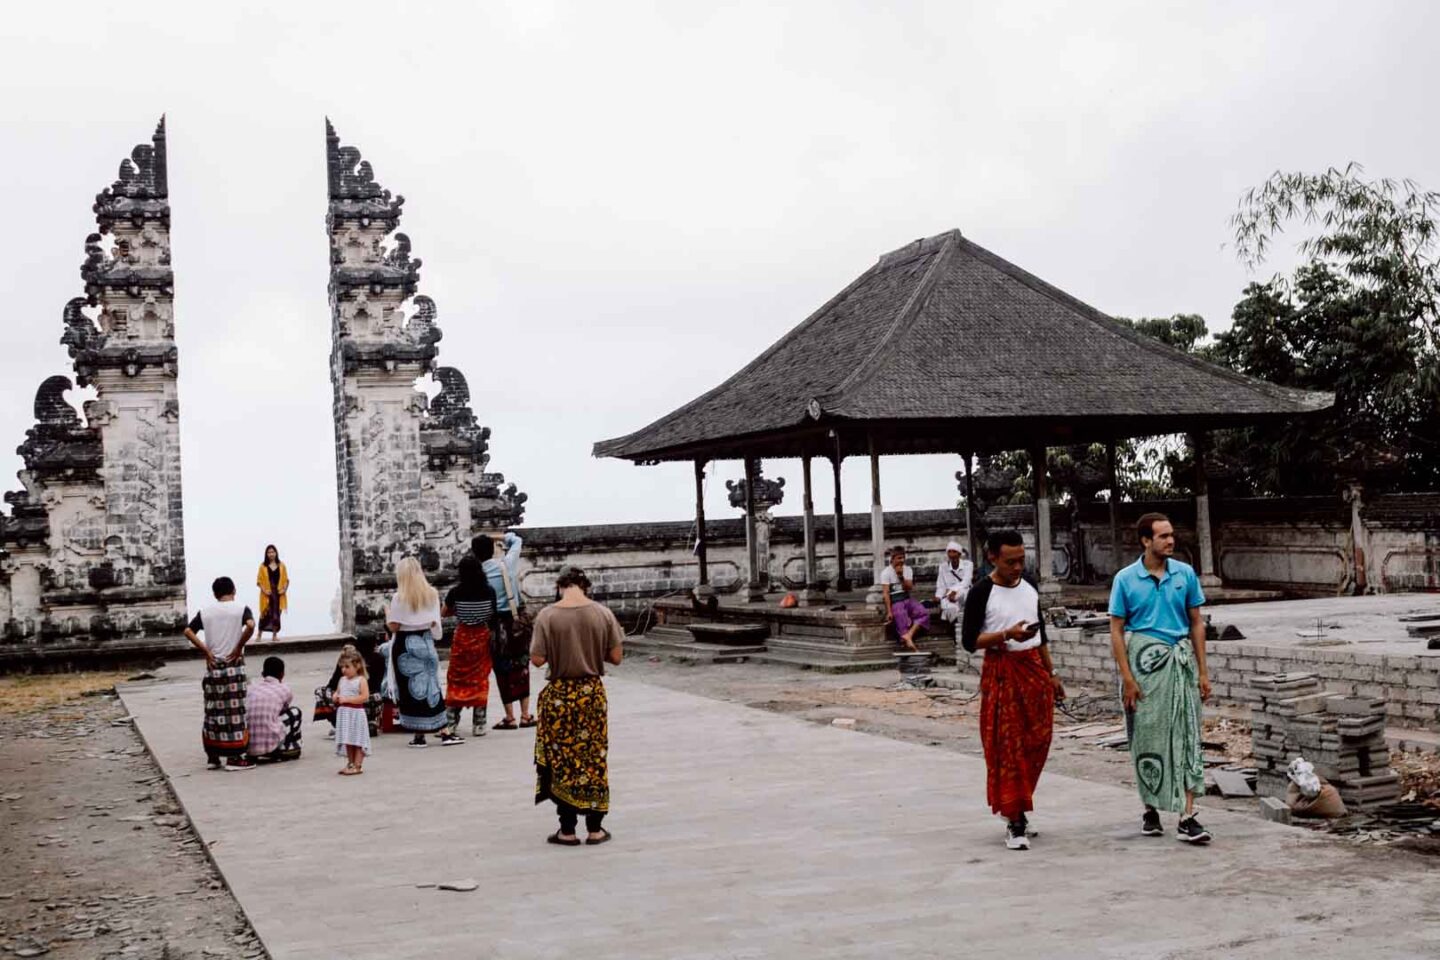 Balinese temple gate